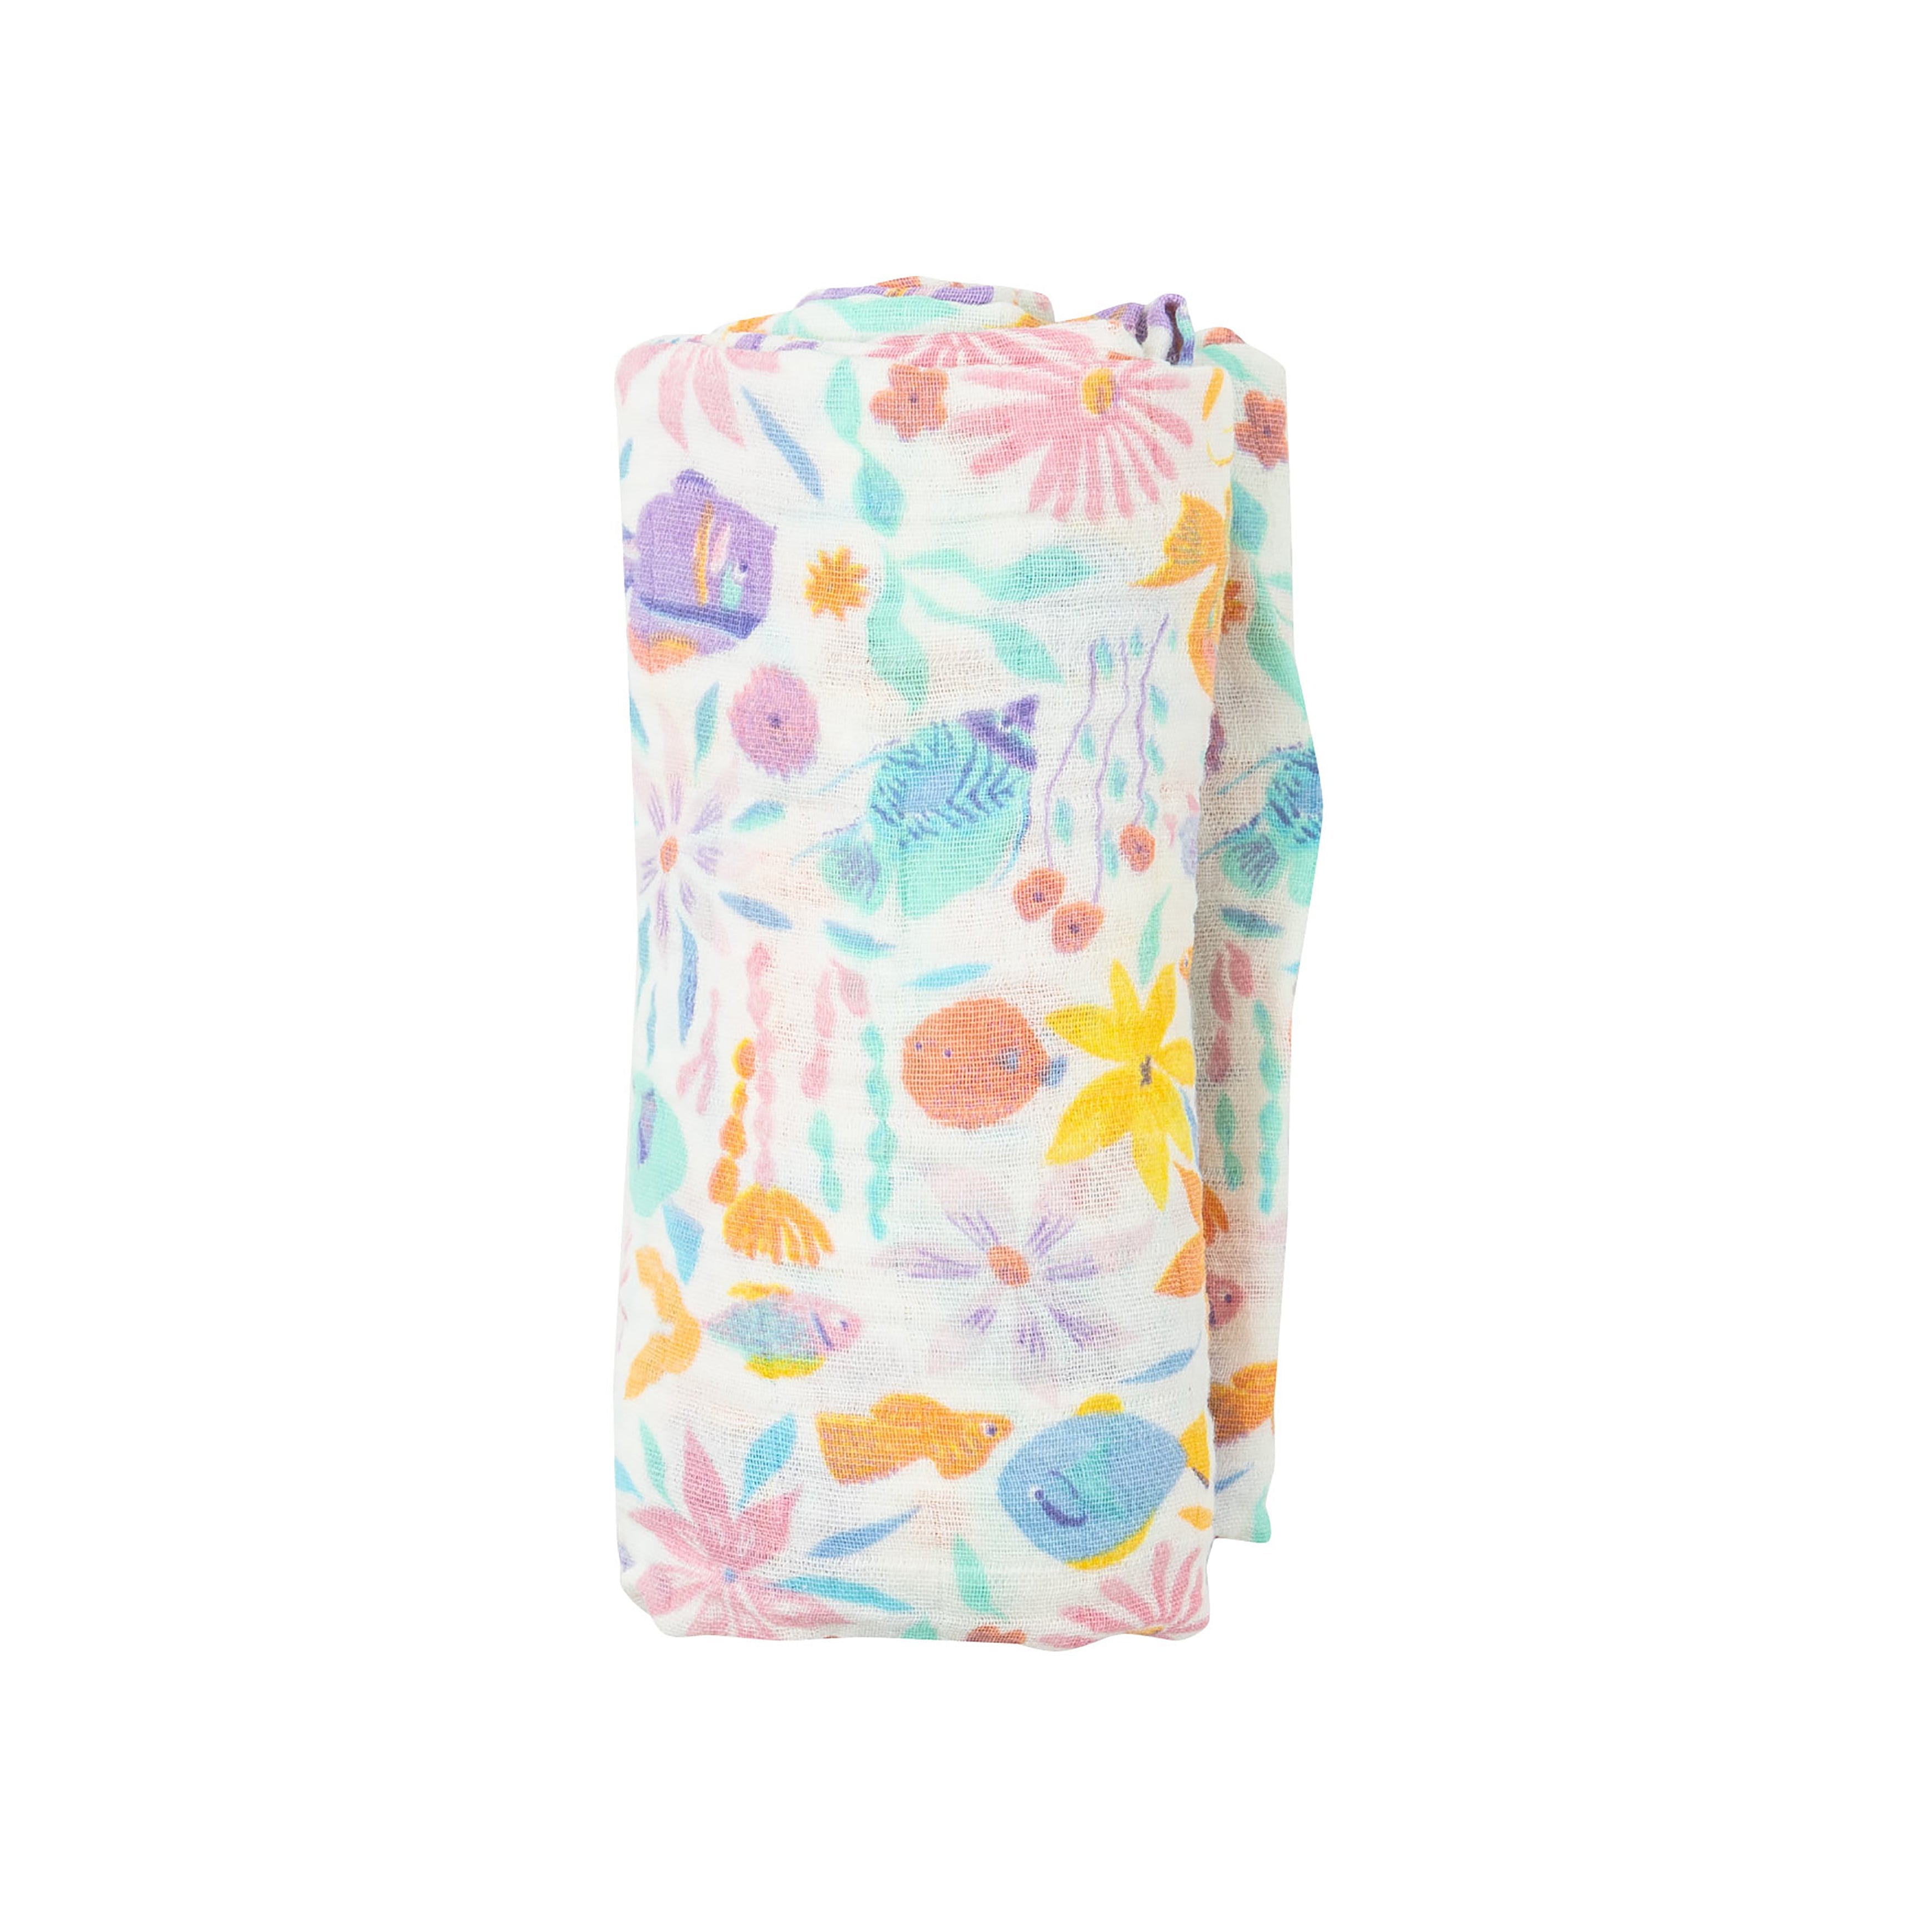 Swaddle Blanket - Tropical Fish Floral